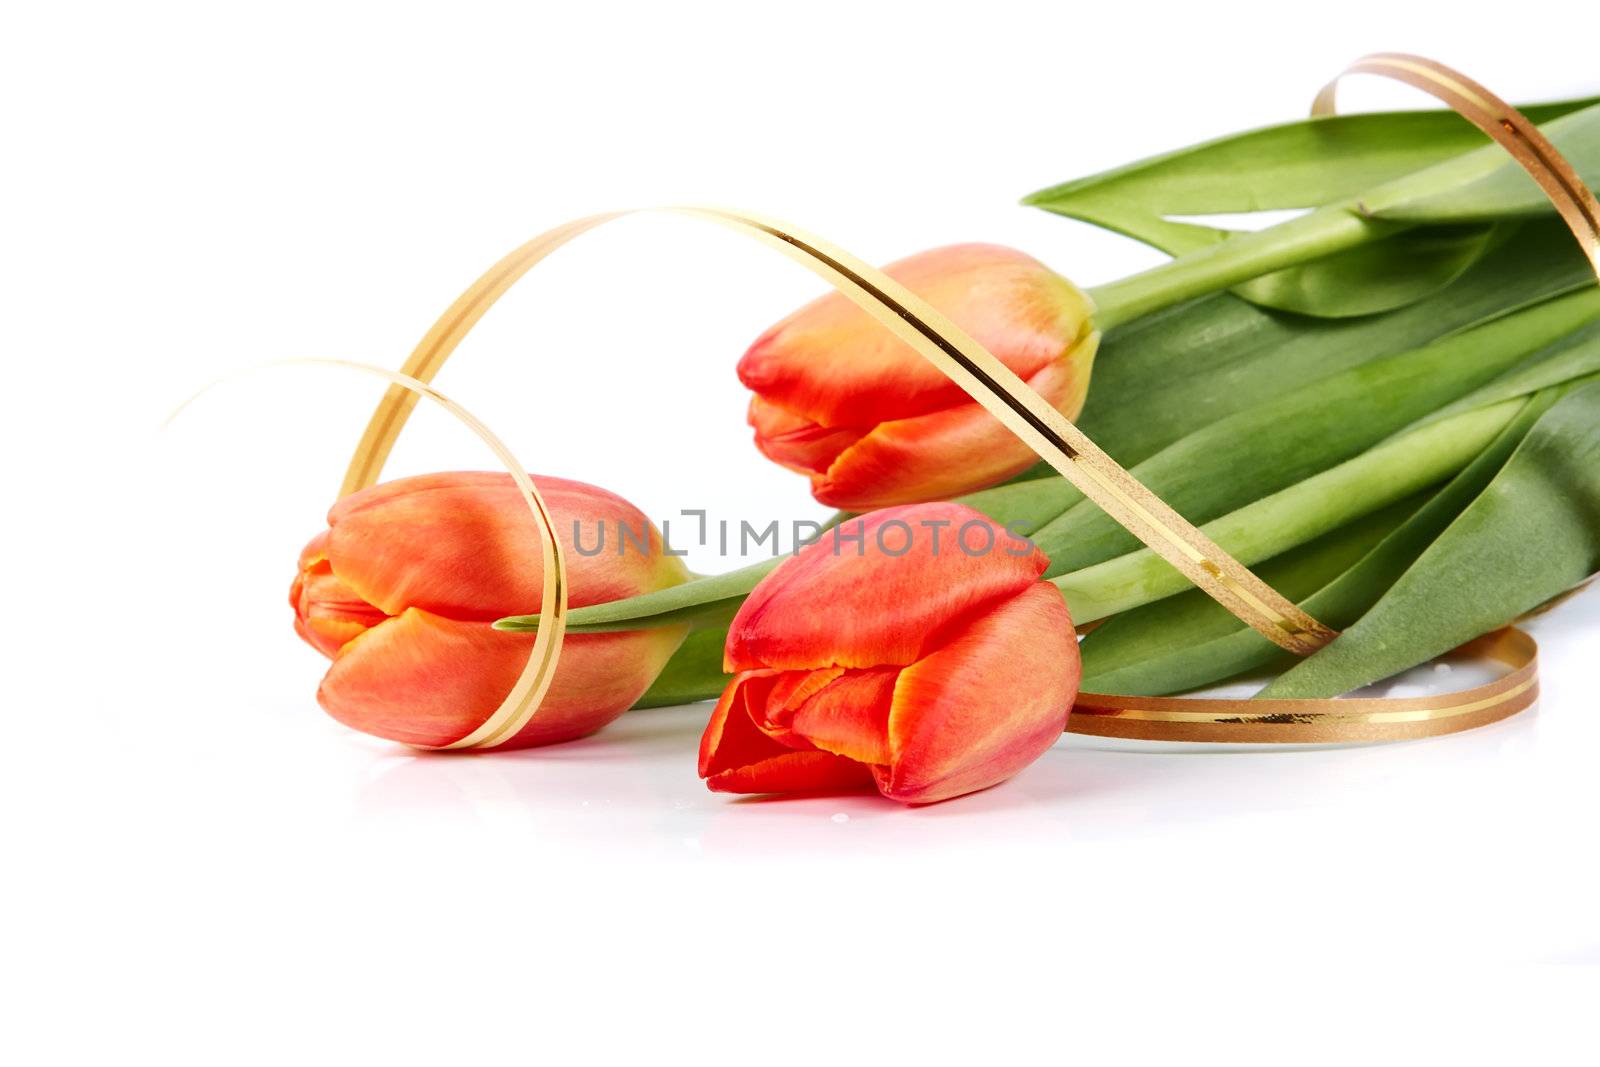 The bouquet of red tulips with a gold ribbon lies on a white background